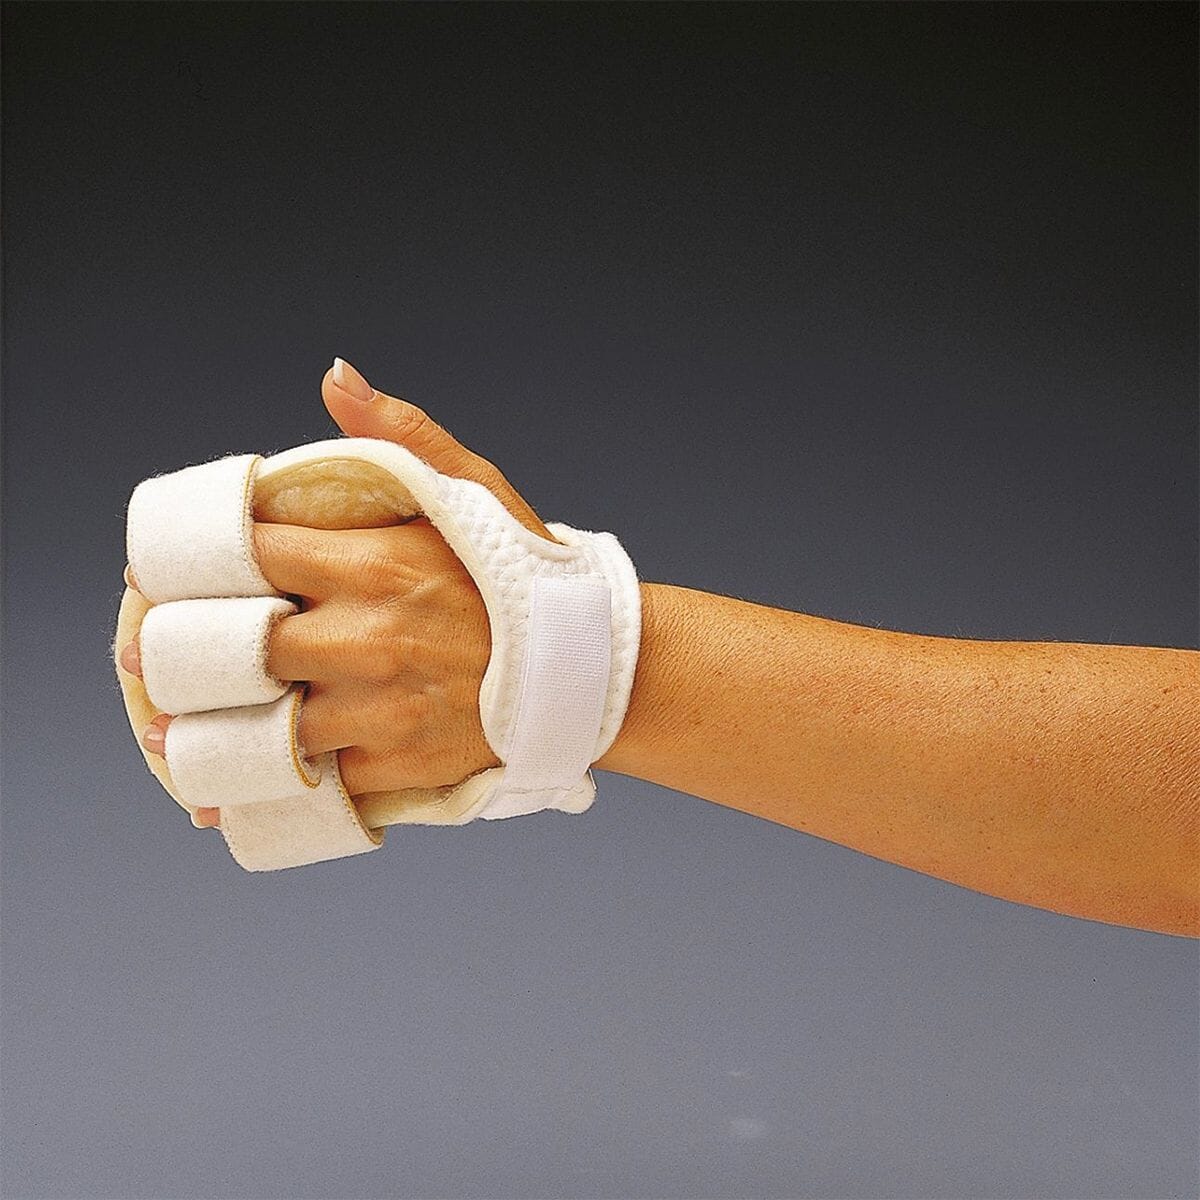 View Positioning Splint Palm ProtectorFinger Right Hand information